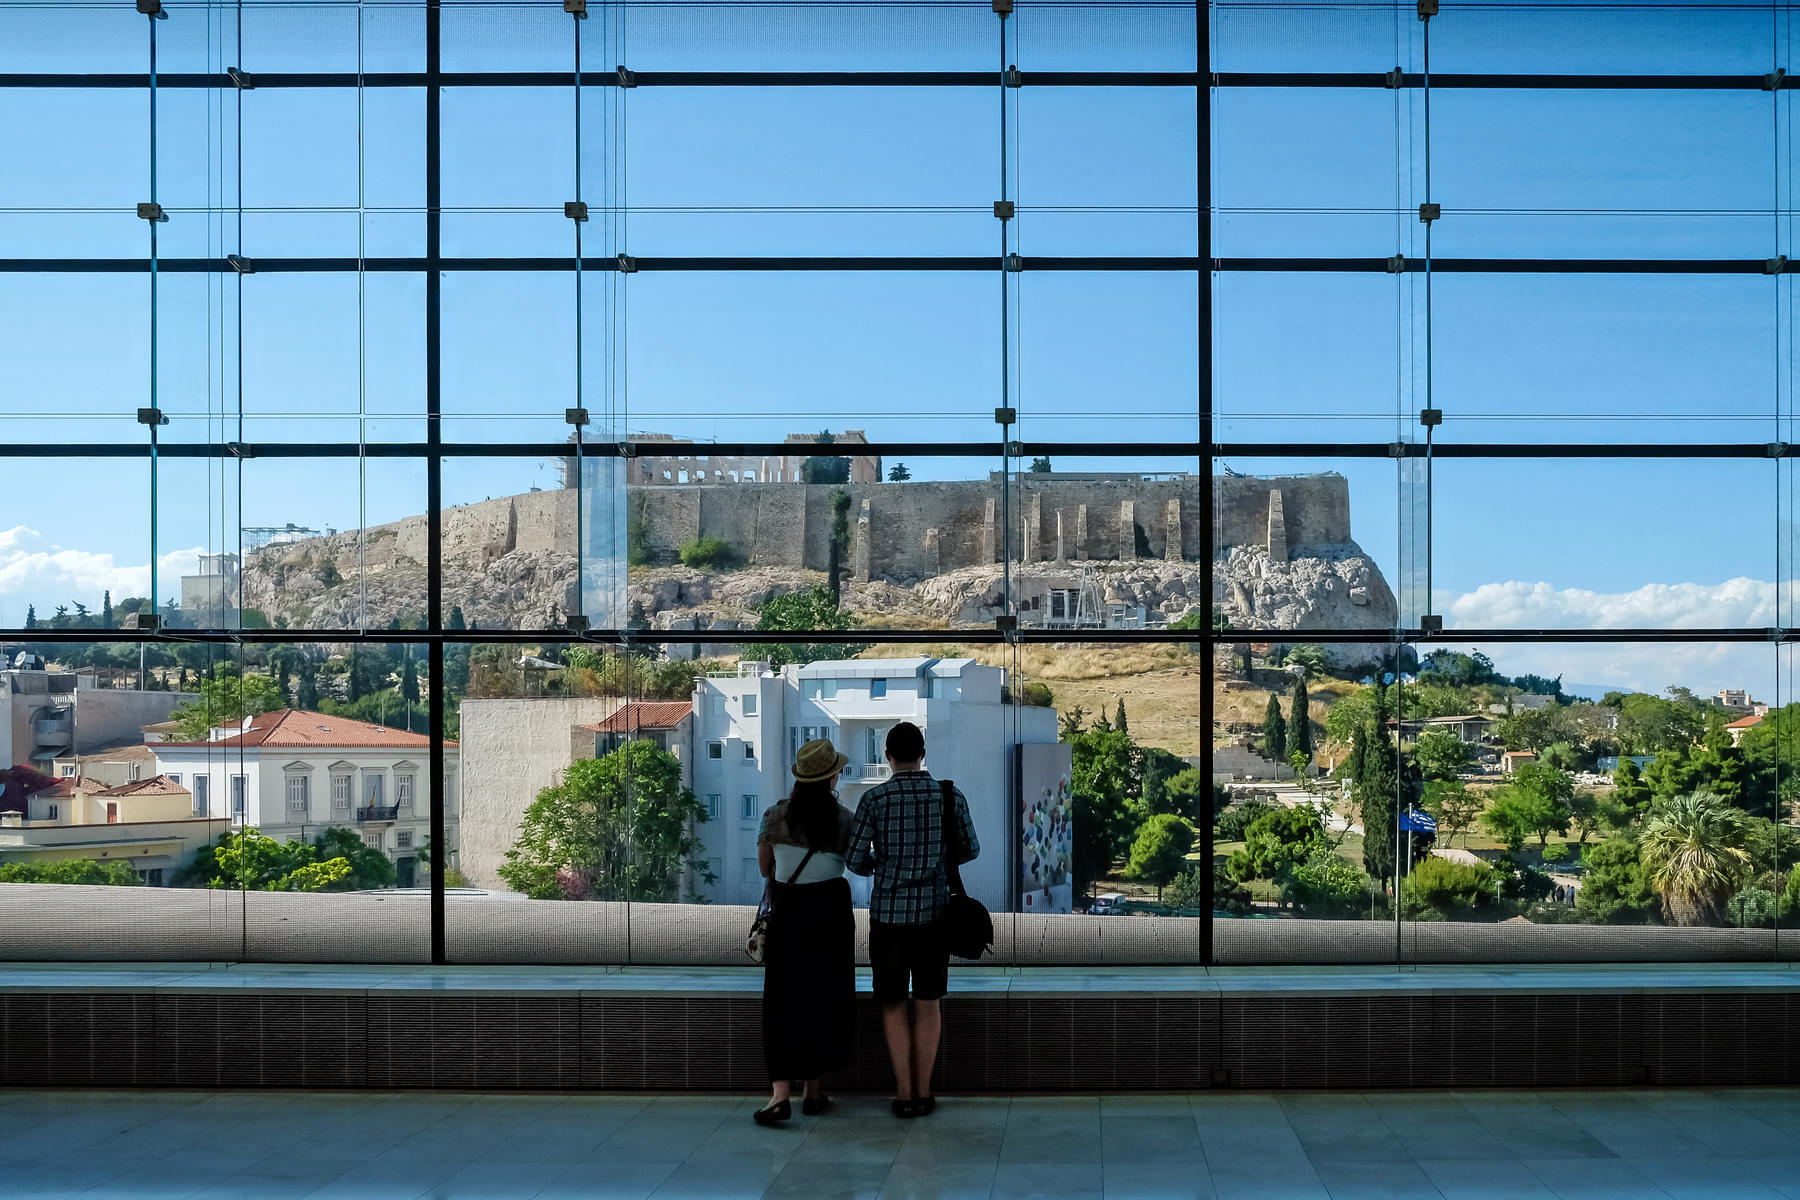 Delve into the ancient history of the city while watching the old Acropolis